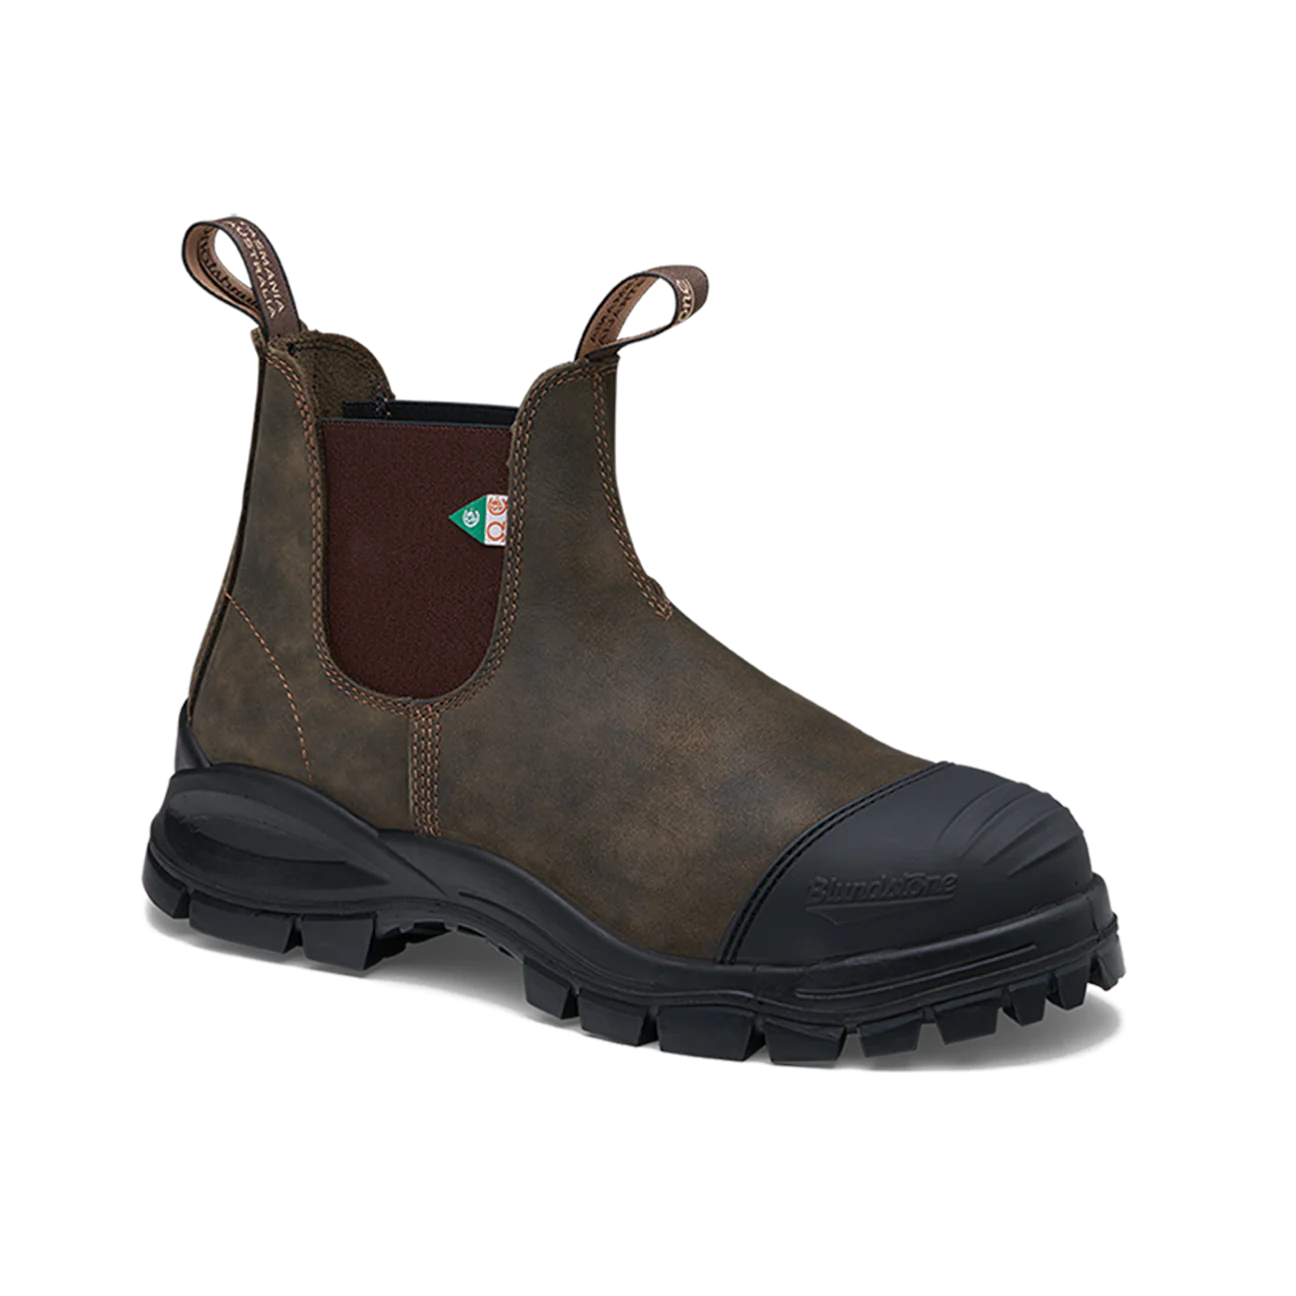 Blundstone 962 steel toe with toe cap-work and safety XFR